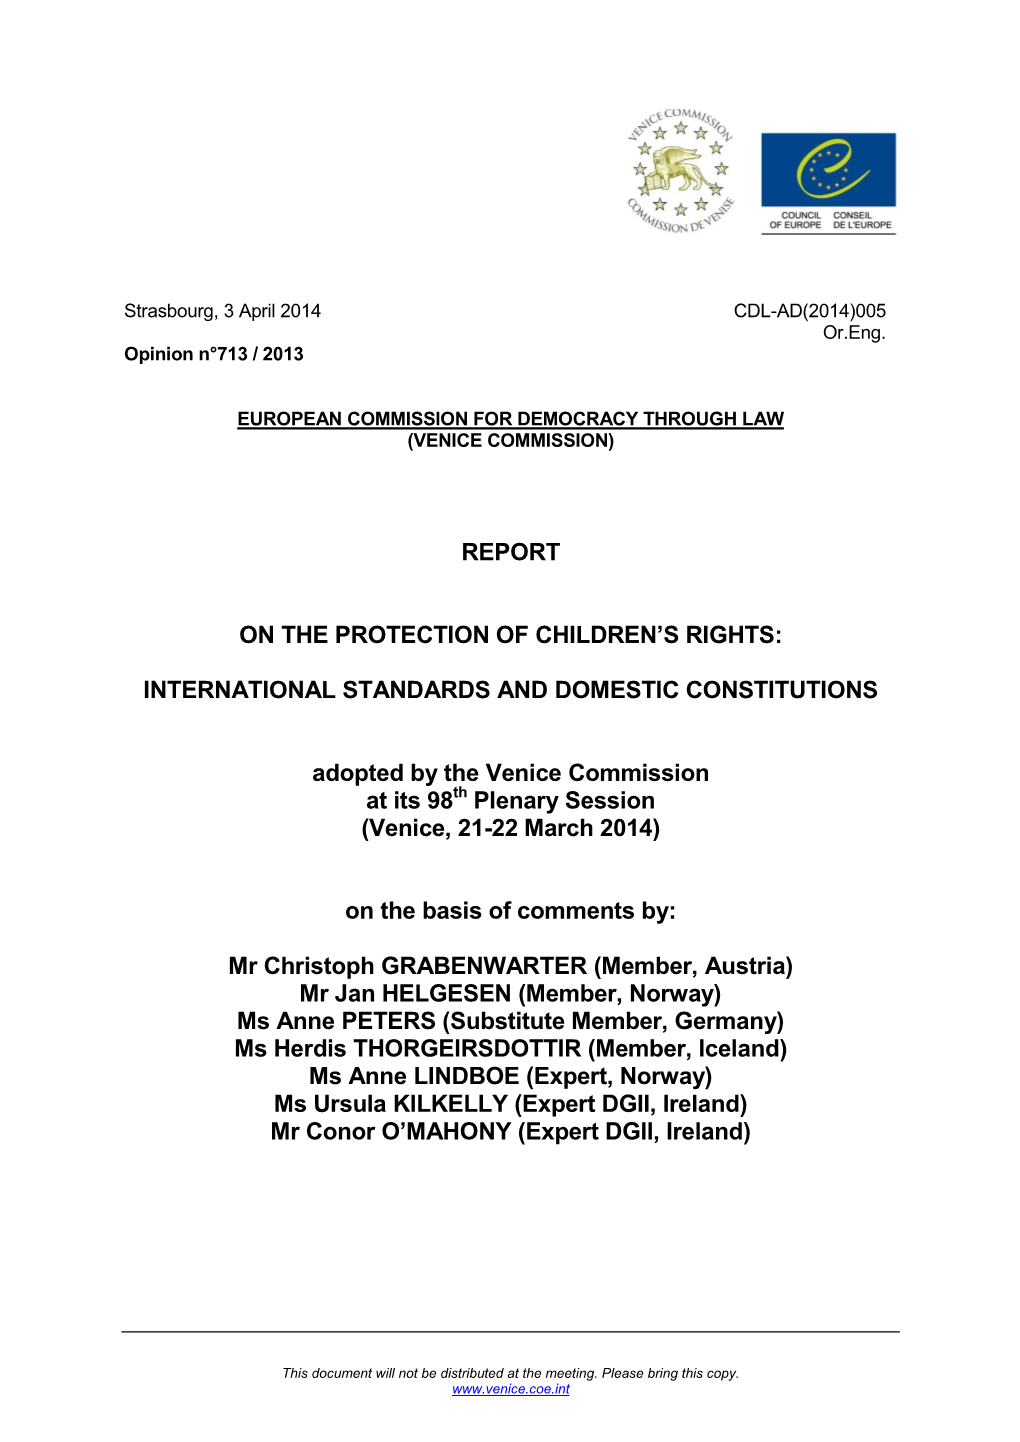 REPORT on the PROTECTION of CHILDREN's RIGHTS: INTERNATIONAL STANDARDS and DOMESTIC CONSTITUTIONS Adopted by the Venice Commis